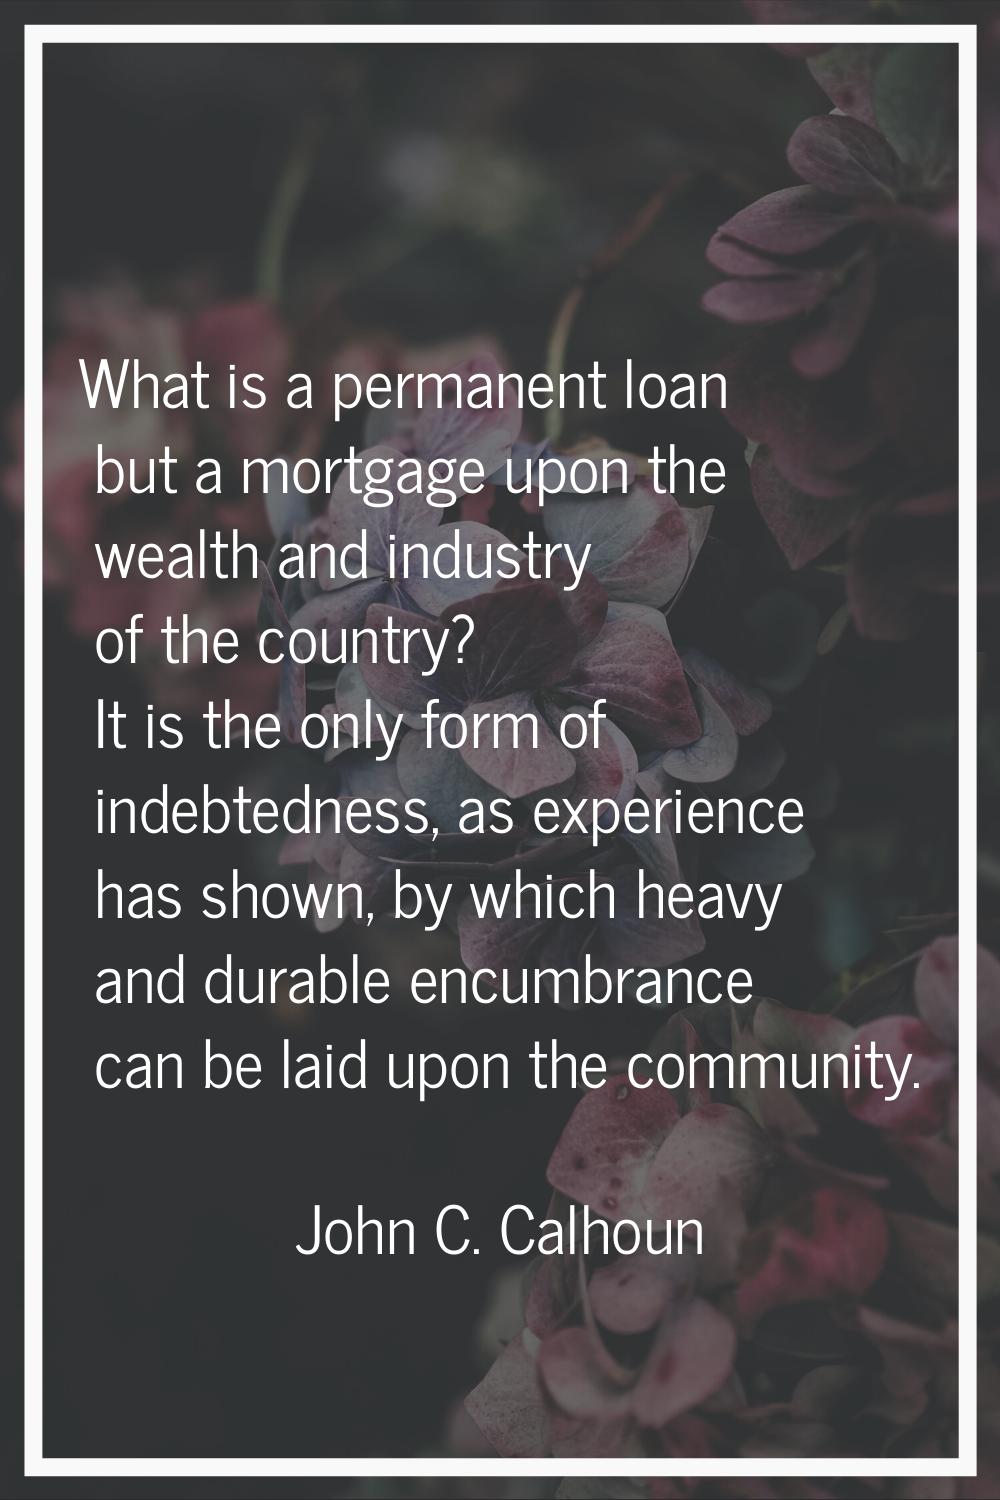 What is a permanent loan but a mortgage upon the wealth and industry of the country? It is the only